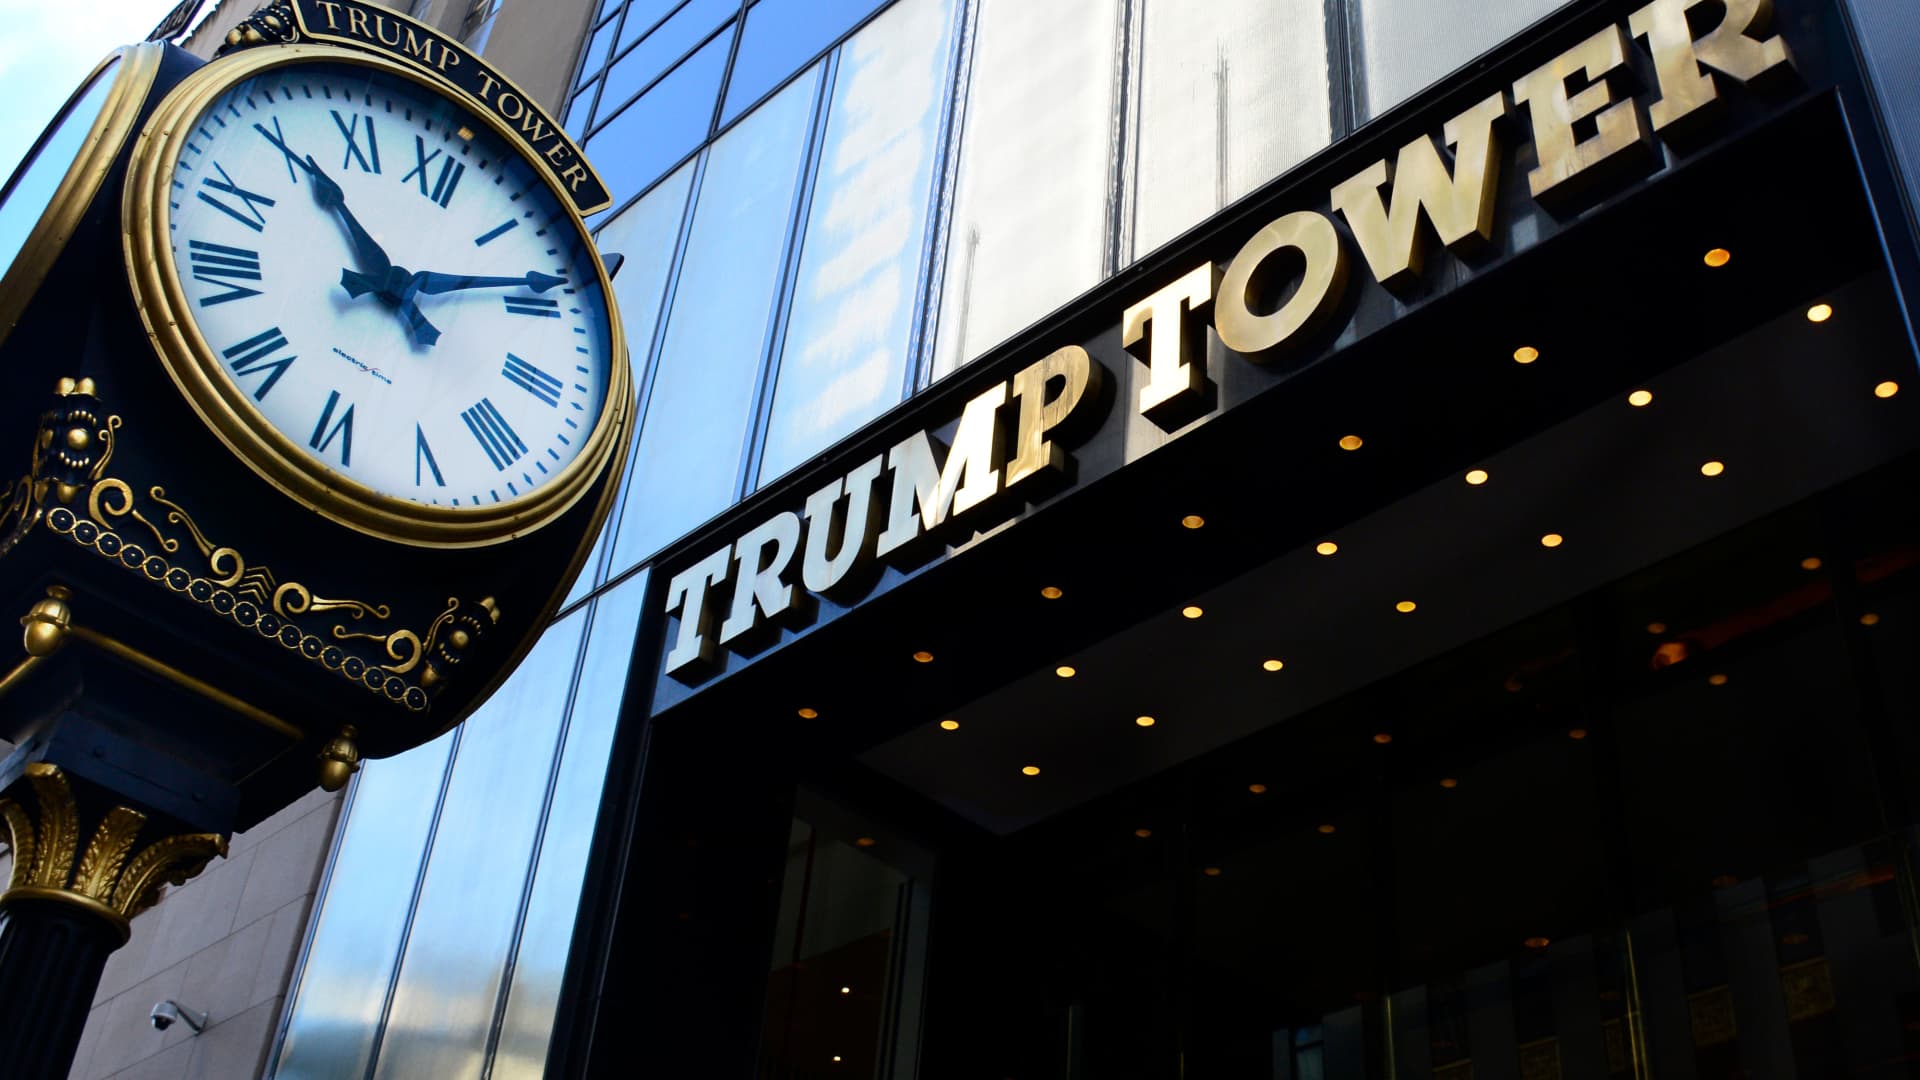 Judge appoints independent monitor to oversee Trump Org financial reporting in N..